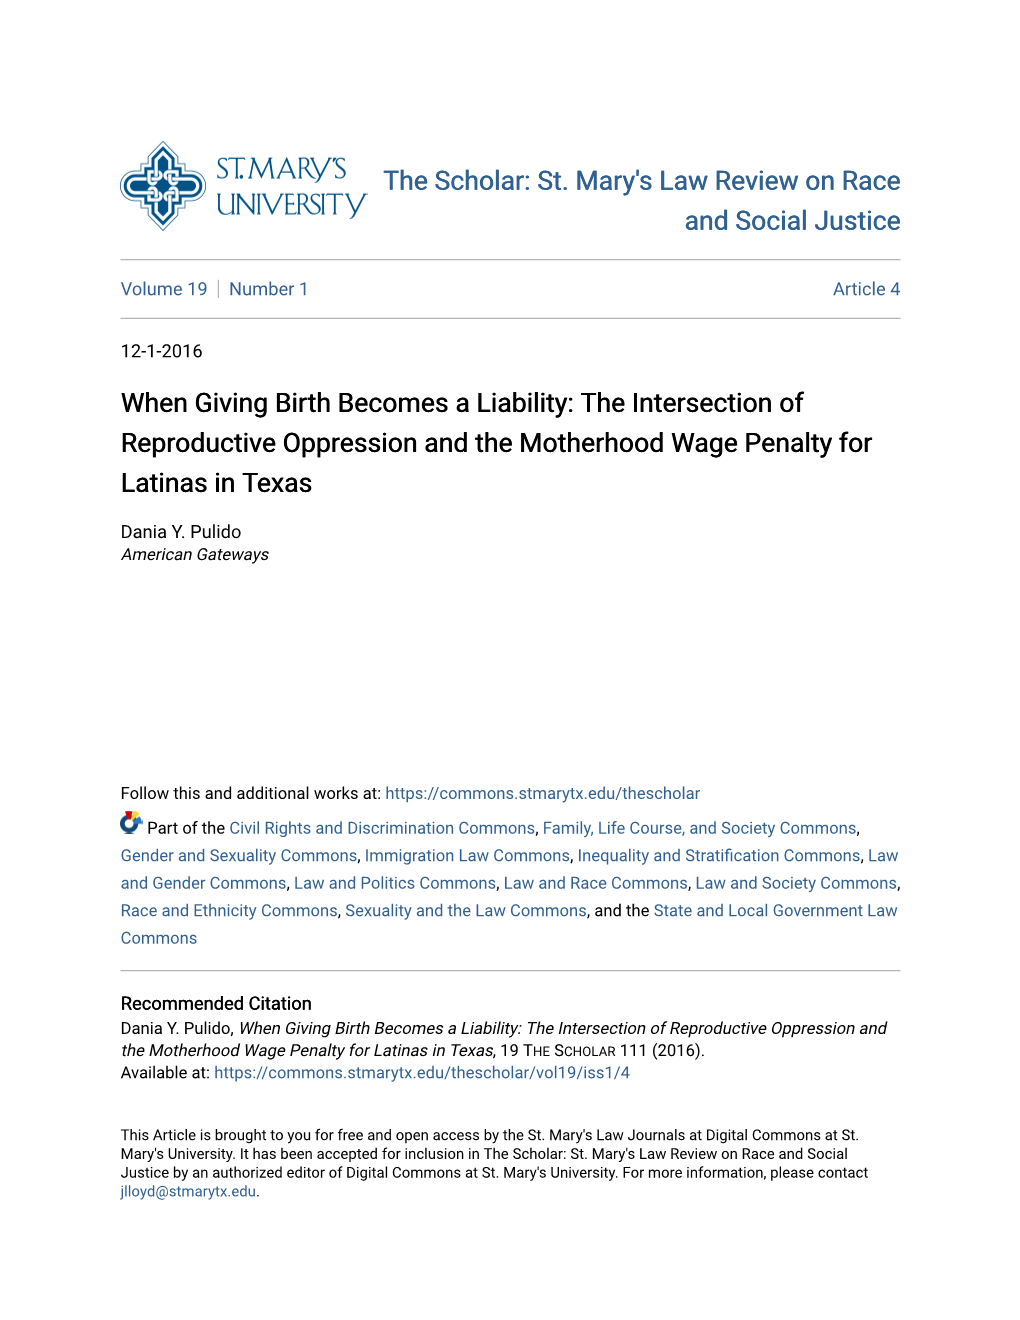 When Giving Birth Becomes a Liability: the Intersection of Reproductive Oppression and the Motherhood Wage Penalty for Latinas in Texas